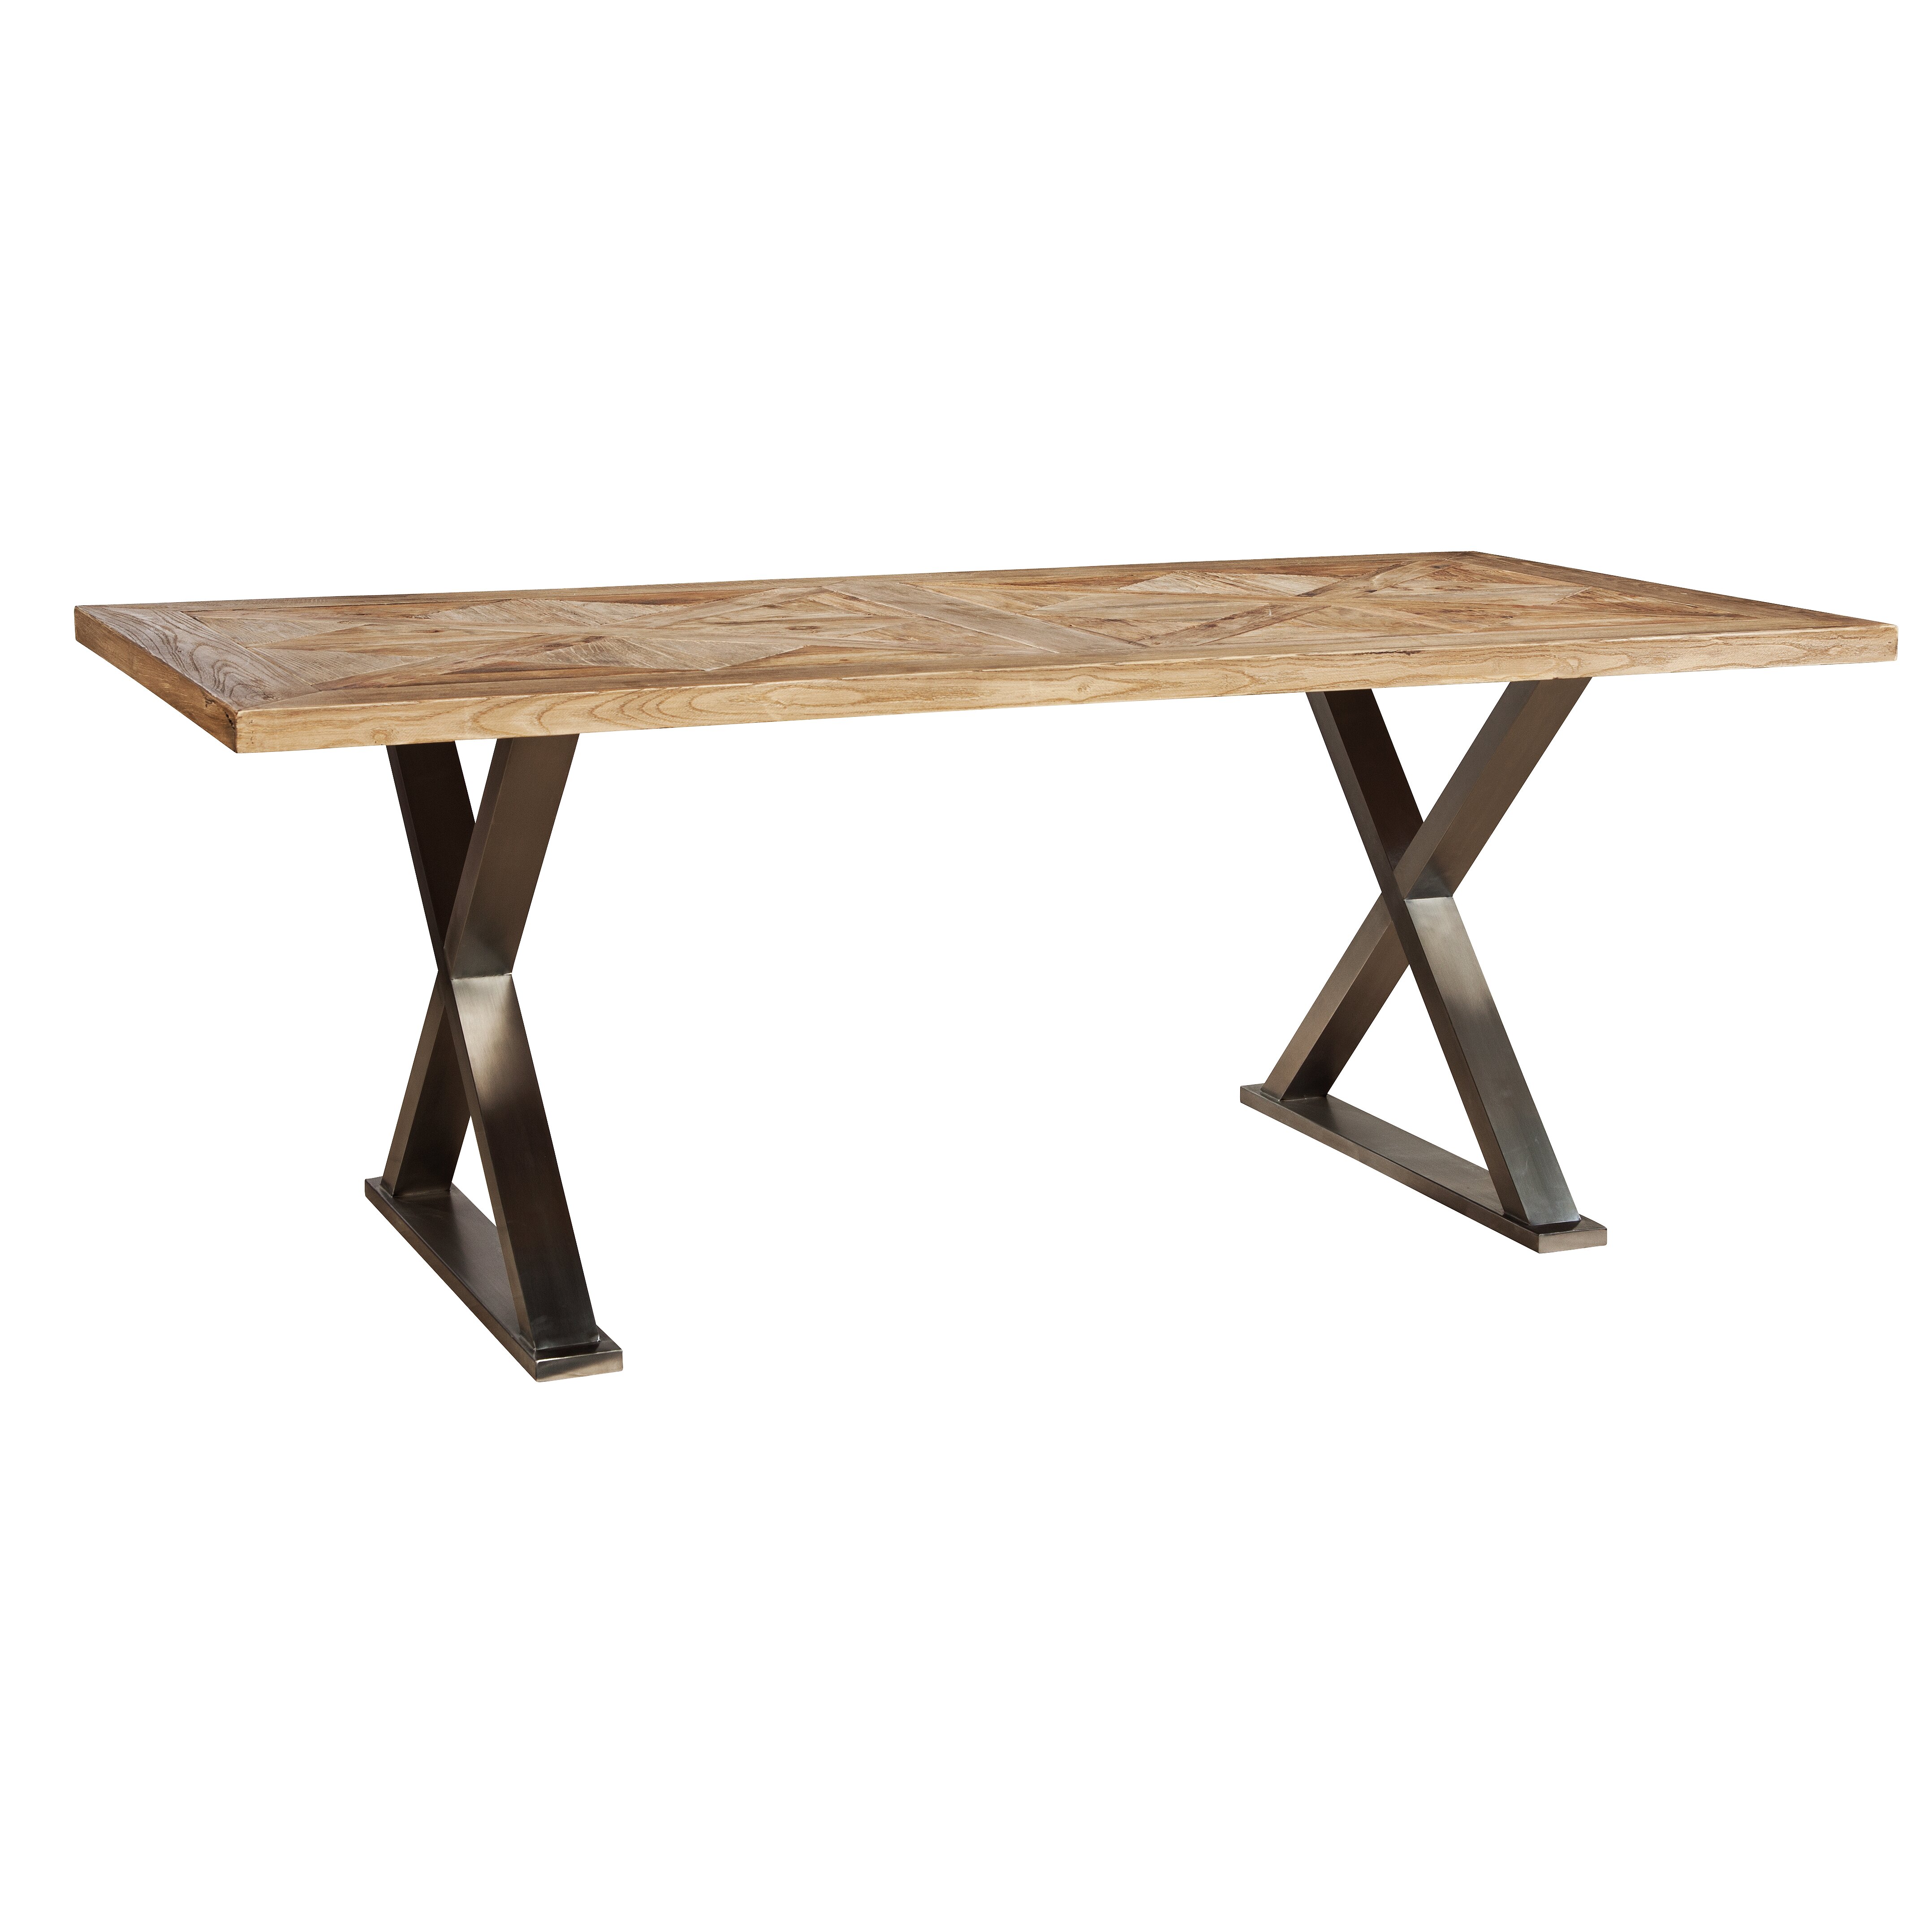 Round Cross Leg Dining Table / Our tops are crafted from hand selected